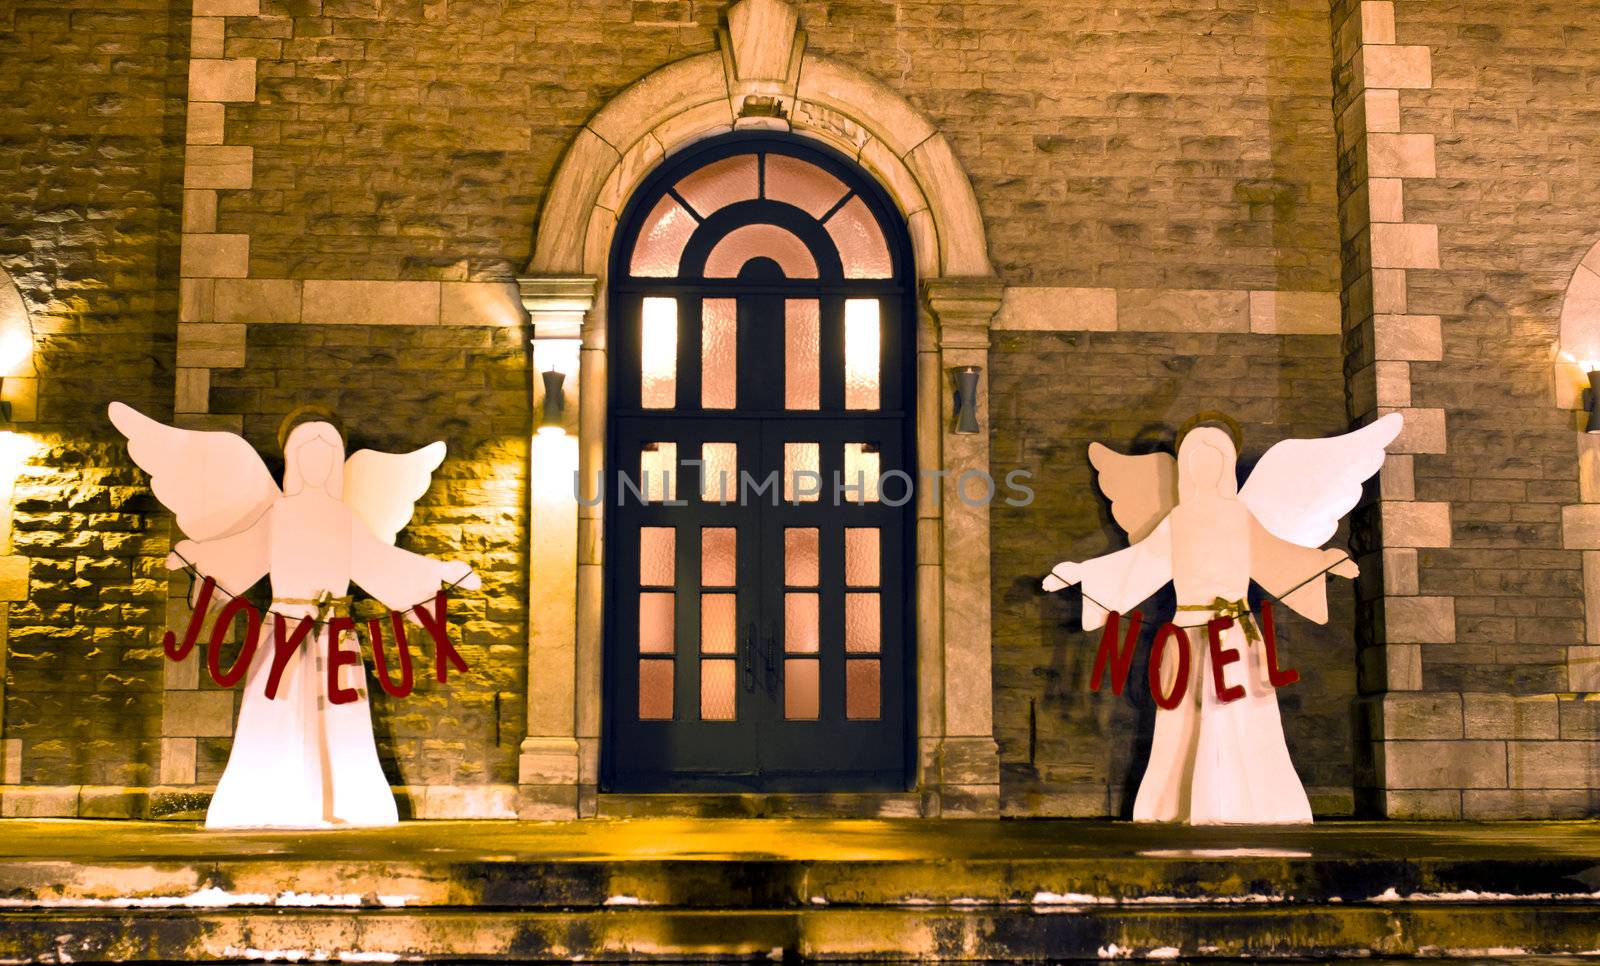 Church entrance decorated for Christmas with angels holding Joyeux Noel letters.